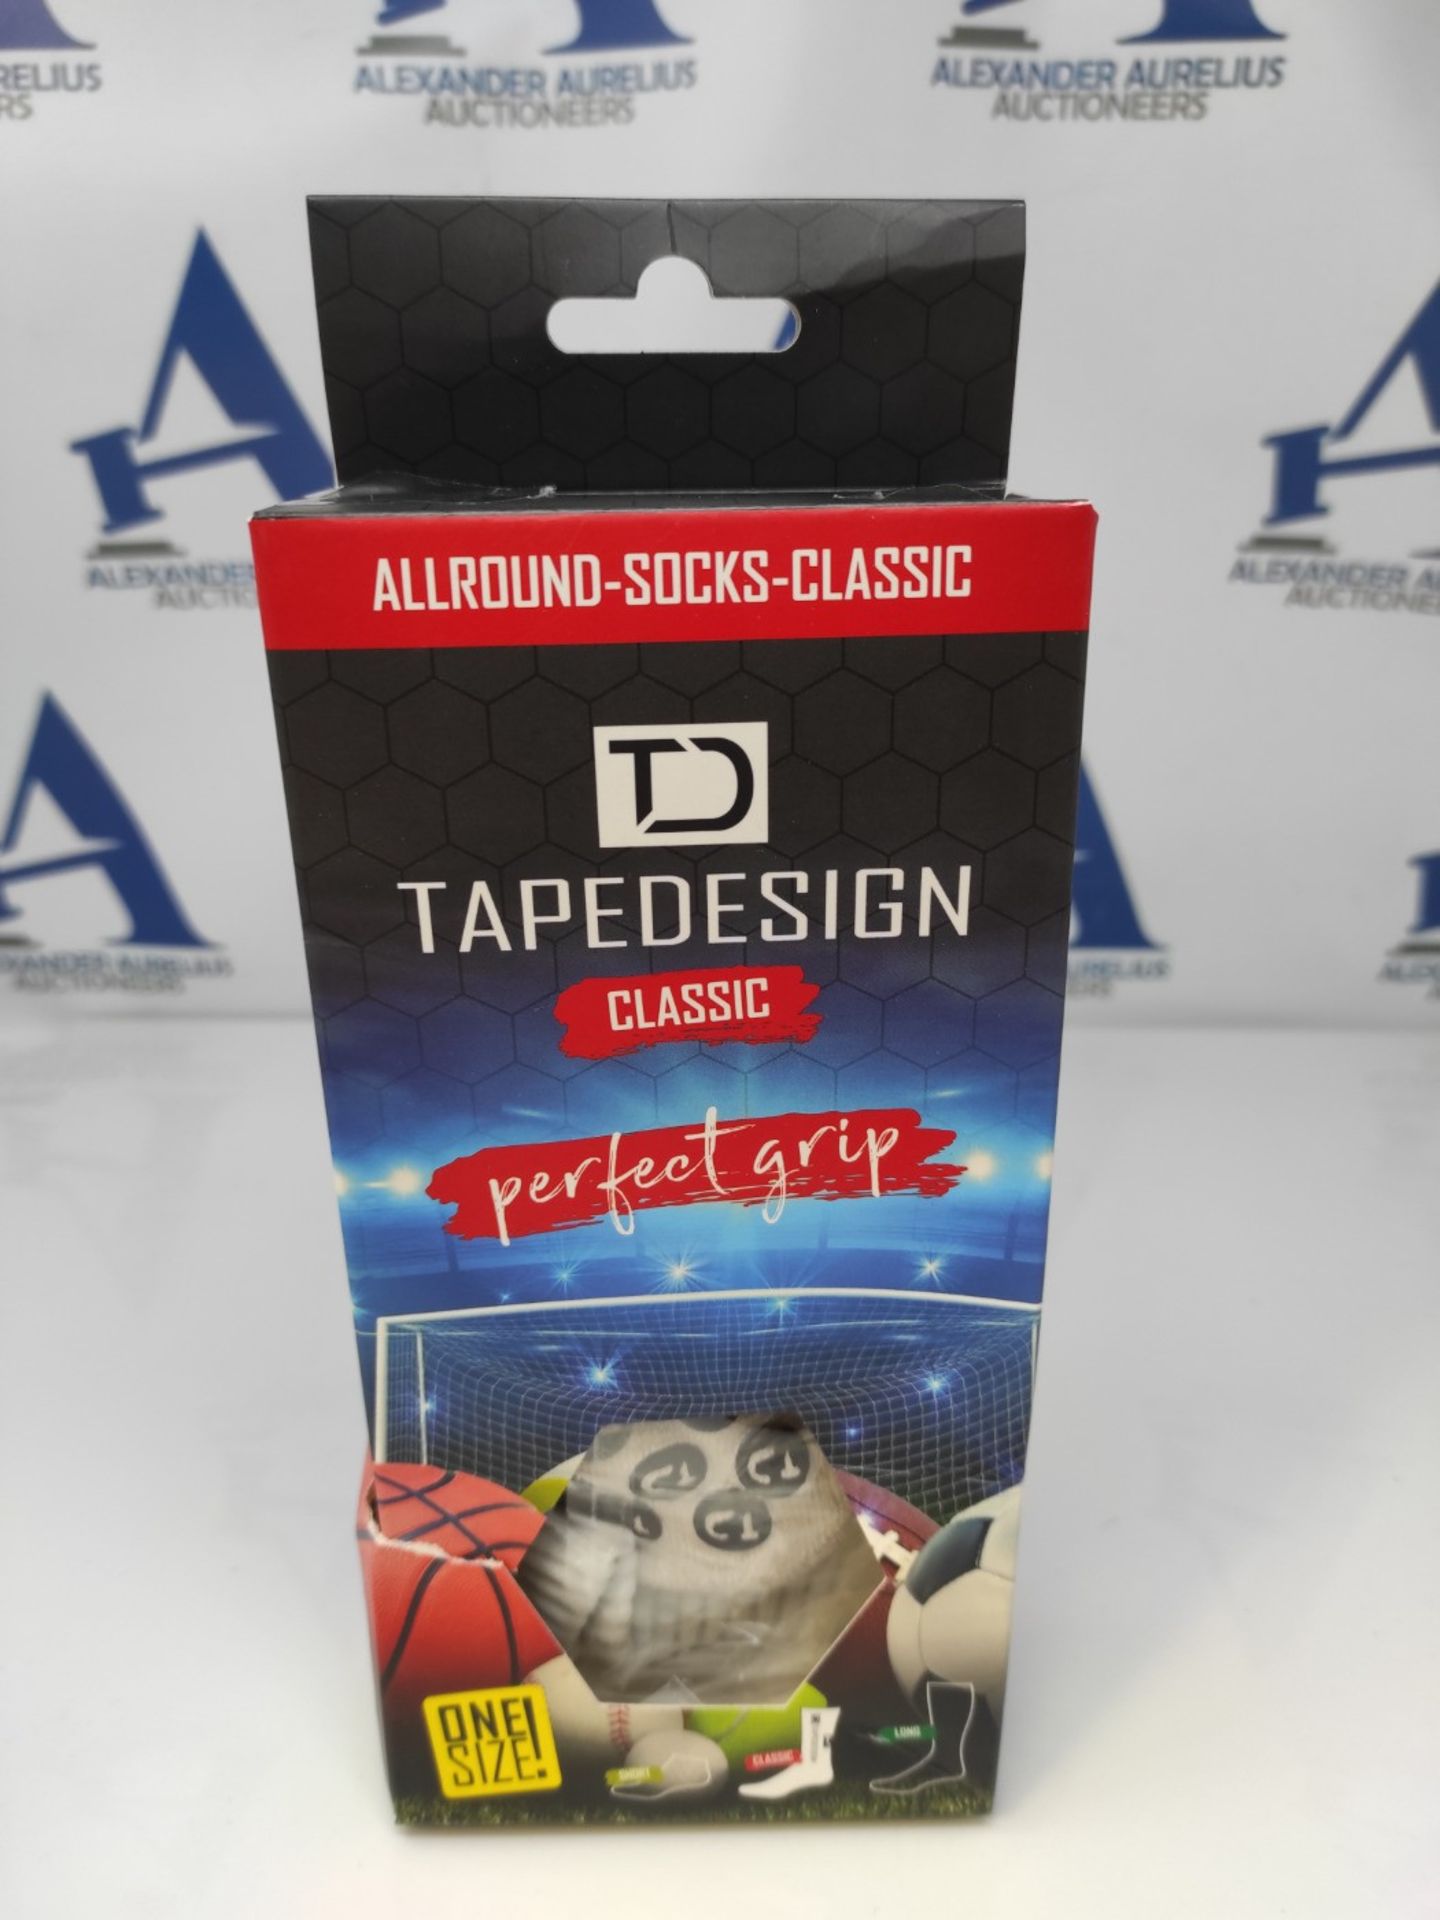 TAPEDESIGN "Classic" - 1 Pair of Non-Slip Soccer Socks with Rubberized Nubs (Unisex) - - Image 3 of 3